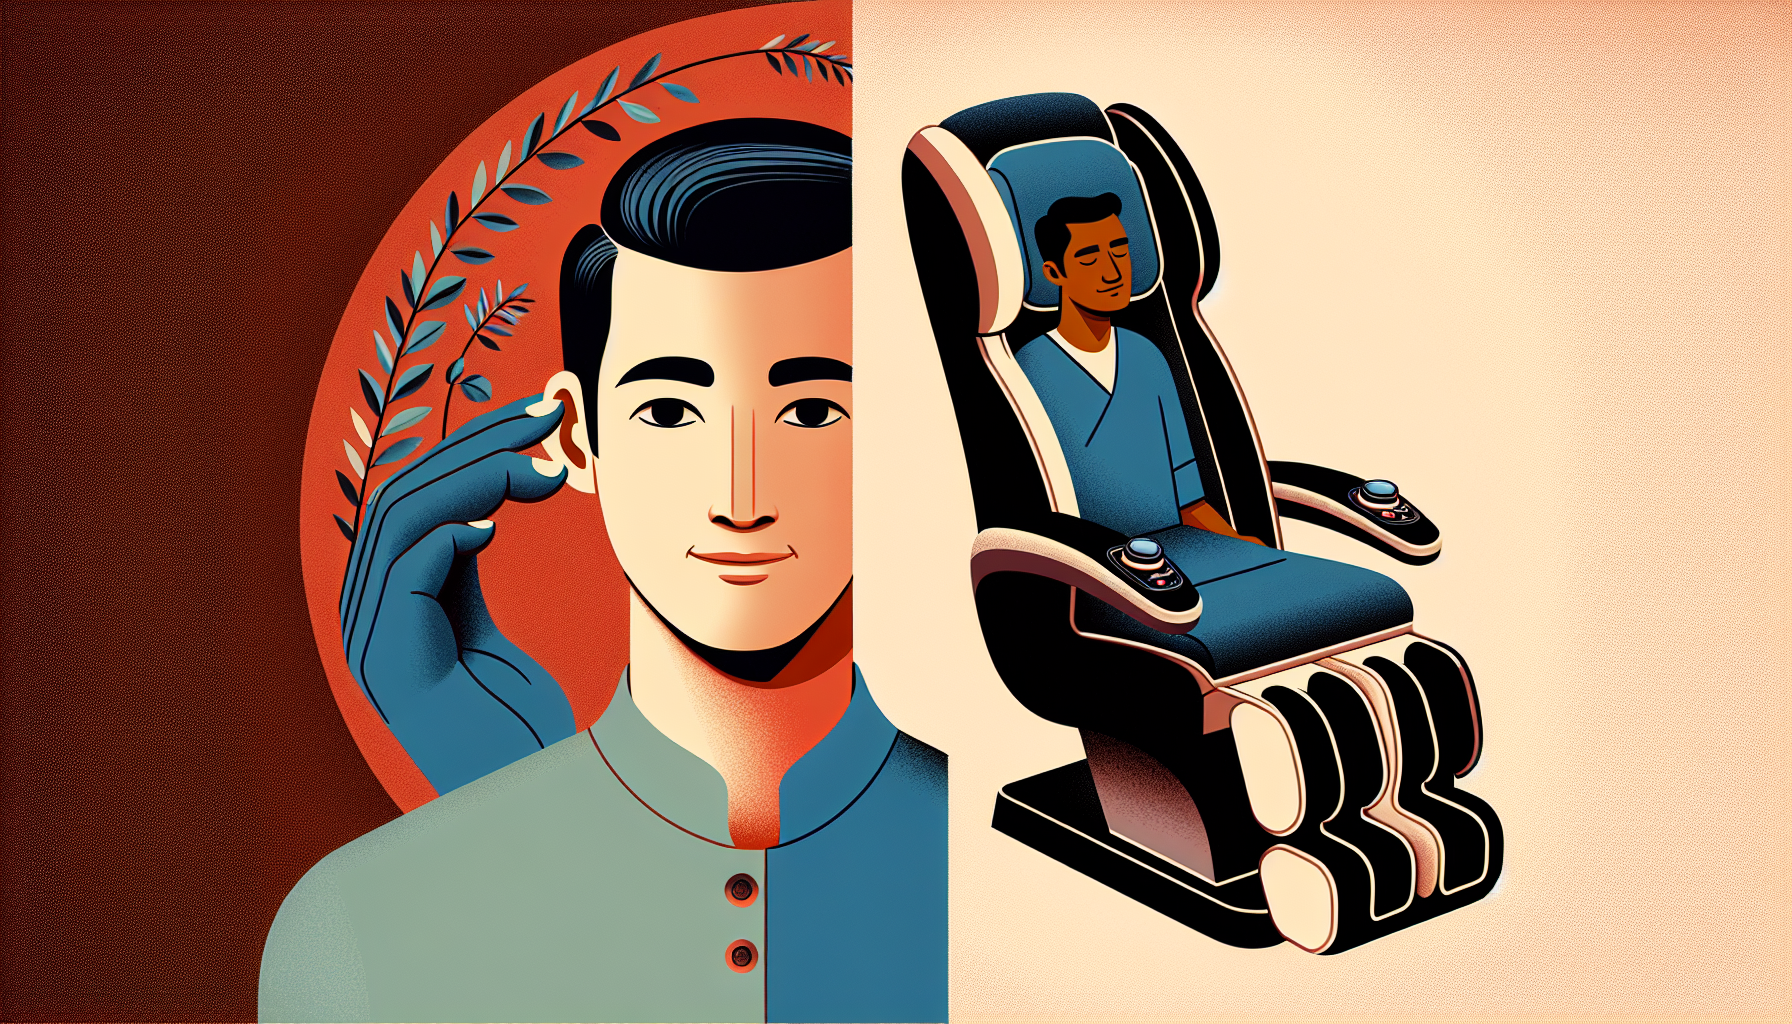 Comparison between a massage therapist and a massage chair